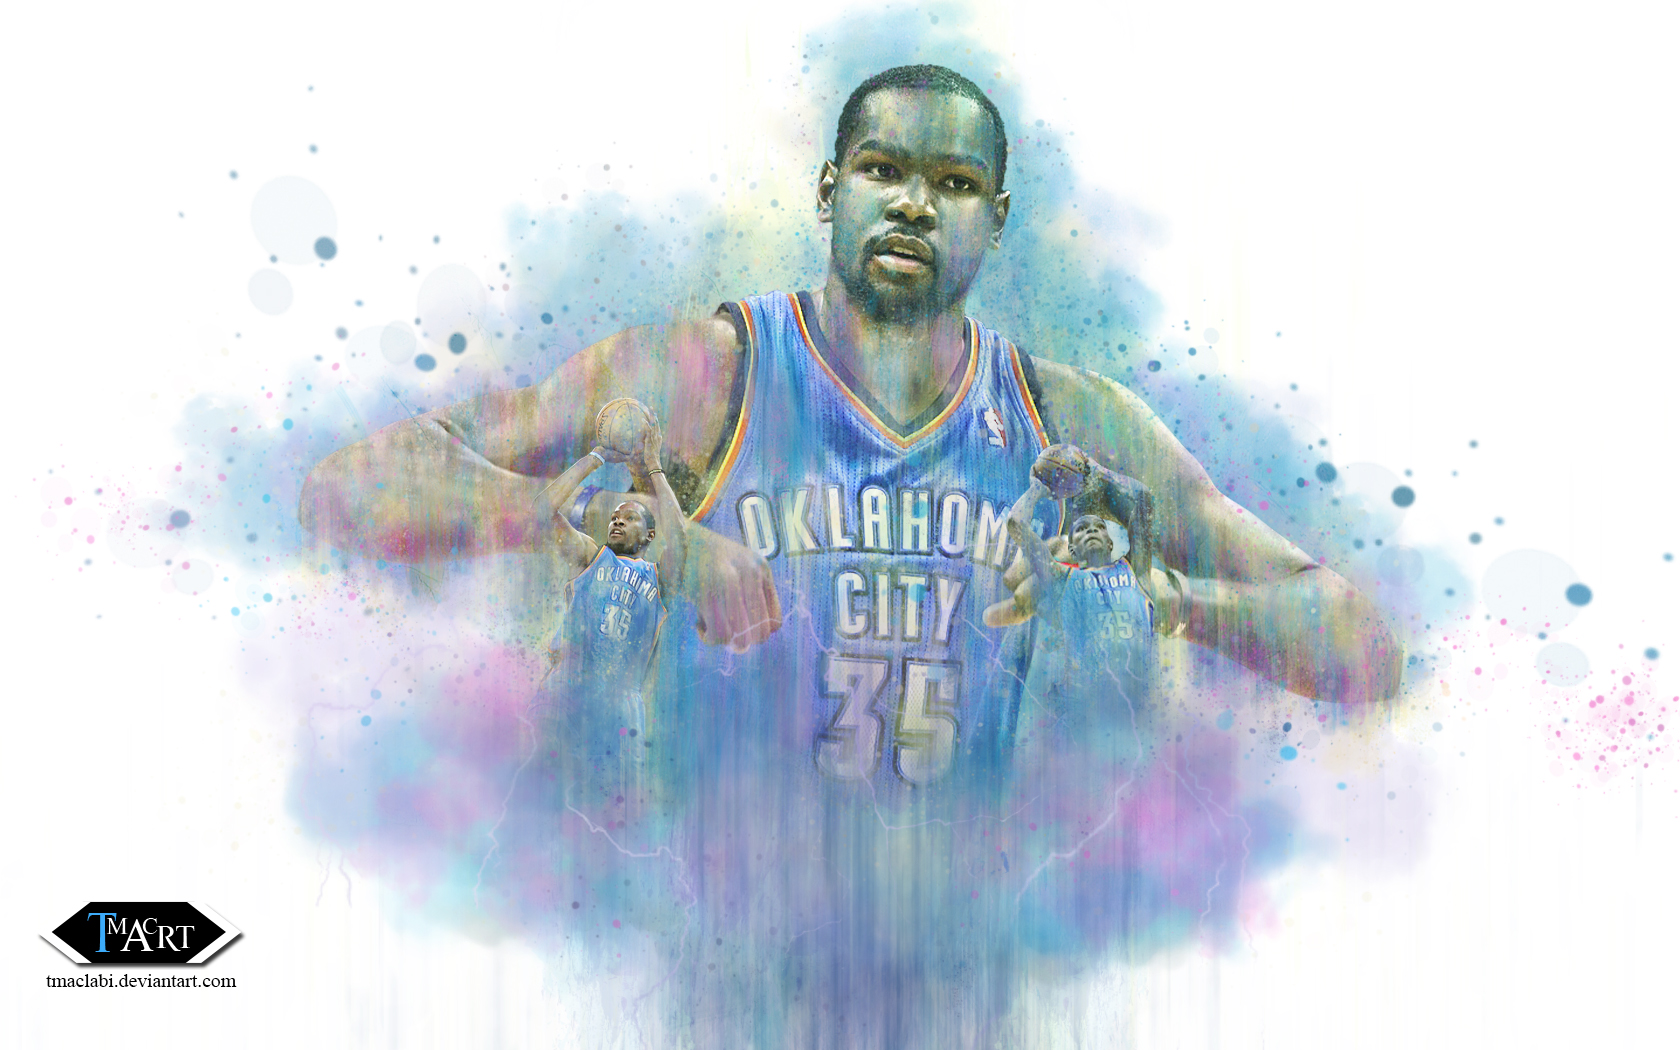 Kevin Durant Ascending Wallpaper By Tmaclabi